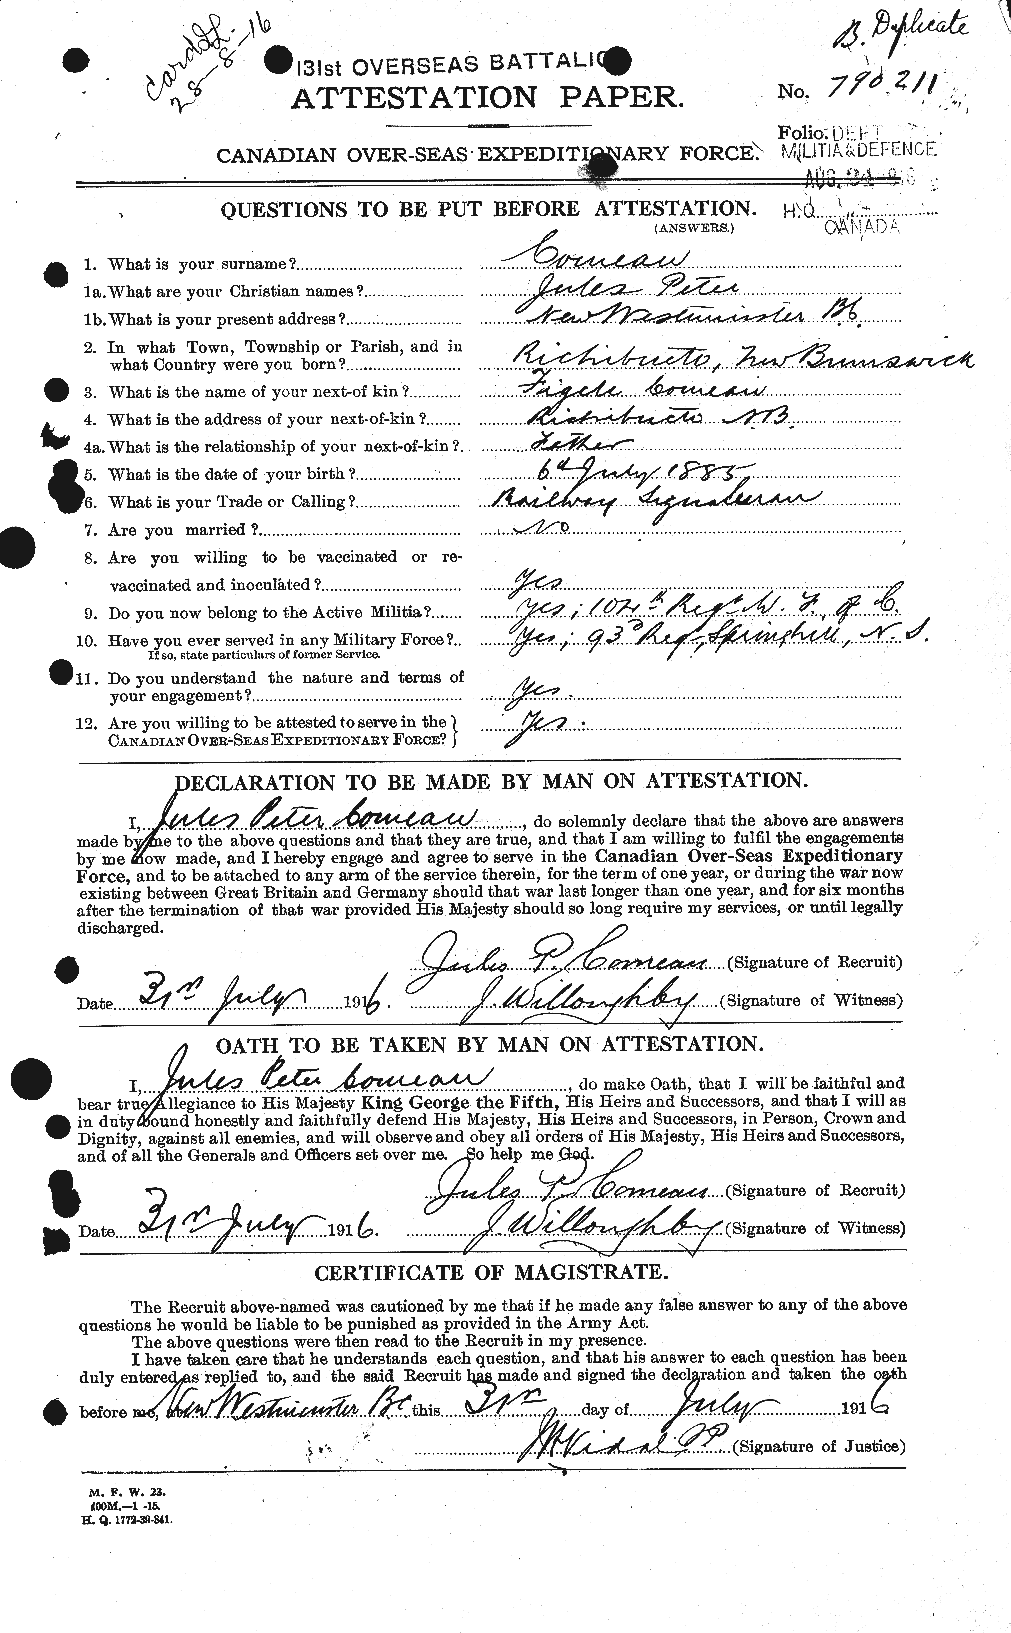 Personnel Records of the First World War - CEF 069588a